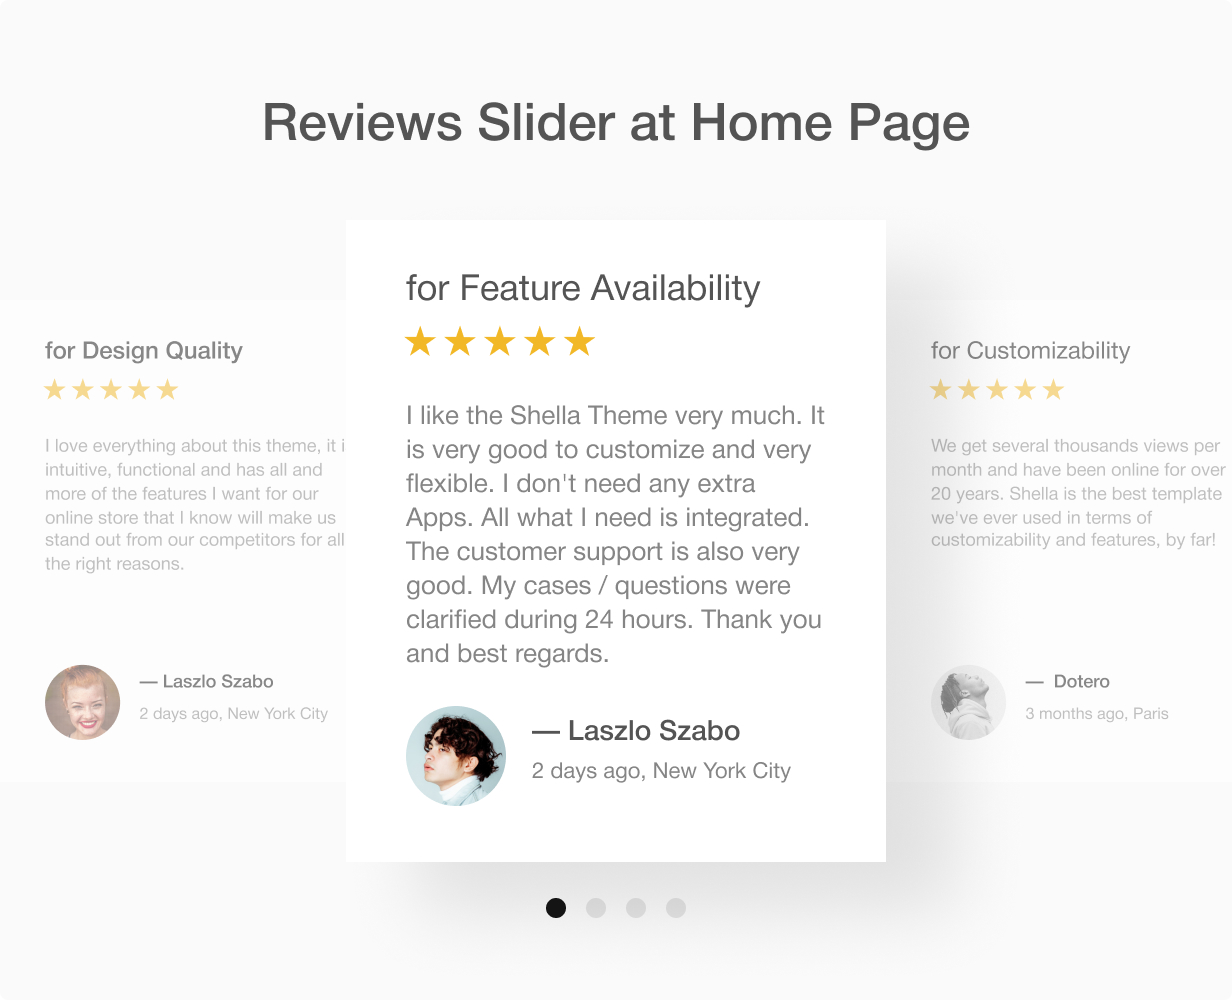 Reviews slider section at home page